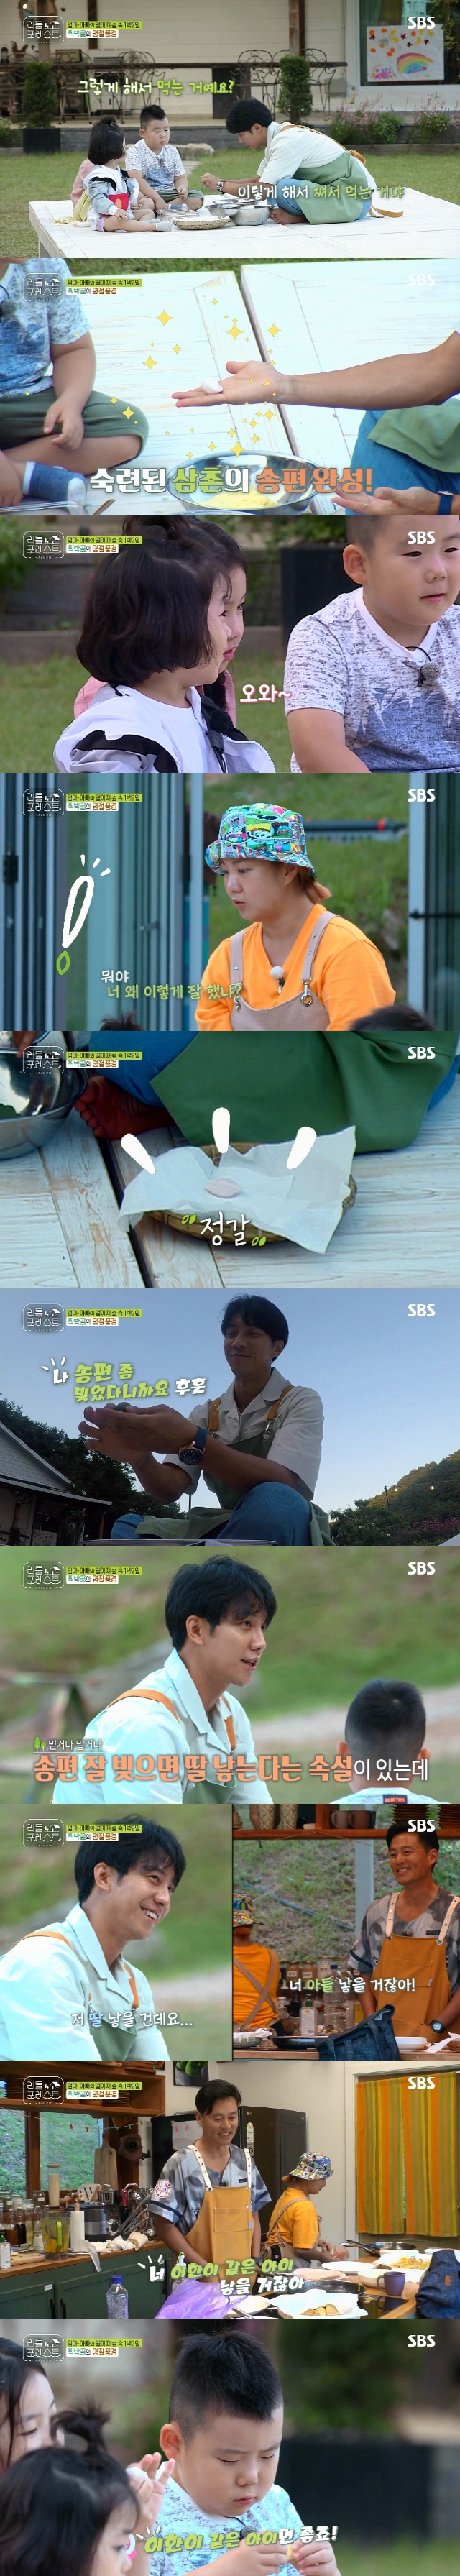 Actor and singer Lee Seung-gi has booked a future Daughter footOn the 17th, SBS Moonhwa Entertainment Little Forest depicted Lee Seo-jin, Lee Seung-gi, Park Na-rae and Jung So-min, who were in the market with Little Lee.The carers and the Littles headed to the market to buy the ingredients for the holiday food, and the Littles were excited about the first market outing with The Uncle and Auntie.But the excitement was also a moment, and Lee Seung-gi and Lee Seo-jin said, If you have children, there is nothing that you think.This is real parenting, lamented Lee Seung-gi and Lee Seo-jin, who only sighed when they lay Little in Restaurant.In the meantime, Park Na-rae and Jung So-min had a good time watching the process of popping with Lee Han and Ye Jun.After waking up, Eugene, Grace, and Gaon headed for the market mill with Lee Seung-gi, who were happy to eat freshly-made rice cakes in honey.Here, I bought a hot dog in the market and ate all of it together for lunch, and a pleasant Chuseok outing continued.After returning home after finishing the shopping, they started to make Chuseok food such as Songpyeon and the war.Following the demonstration of the self-styled title Songpyeons Master Show Lee Seung-gi The Uncle, Little also participated in the songpyeon production.The family-like appearance of preparing Chuseok food together made me smile.Above all, Lee Seung-gi said, Is not there a myth that you will have a daughter if you make a songpyeon well?He watched the beautiful songpyeon he owed and booked the future Daughter fool and laughed.Lee Seo-jin gave me a pinch saying, You are going to have a son. Lee Seung-gi did not lose and said, I will have a daughter.At the end of these twists and turns, Chuseok was set up, and Little and carers enjoyed a lot of dinner with Songpyeon and Chuseok food.Then came the breakup time for Littles to take their familys hands and return. Grace stopped and started crying.To her mother, who asked why, Grace cried, I want to see my aunt Somin. This scene soared to 6.1% per minute and won the best one minute.